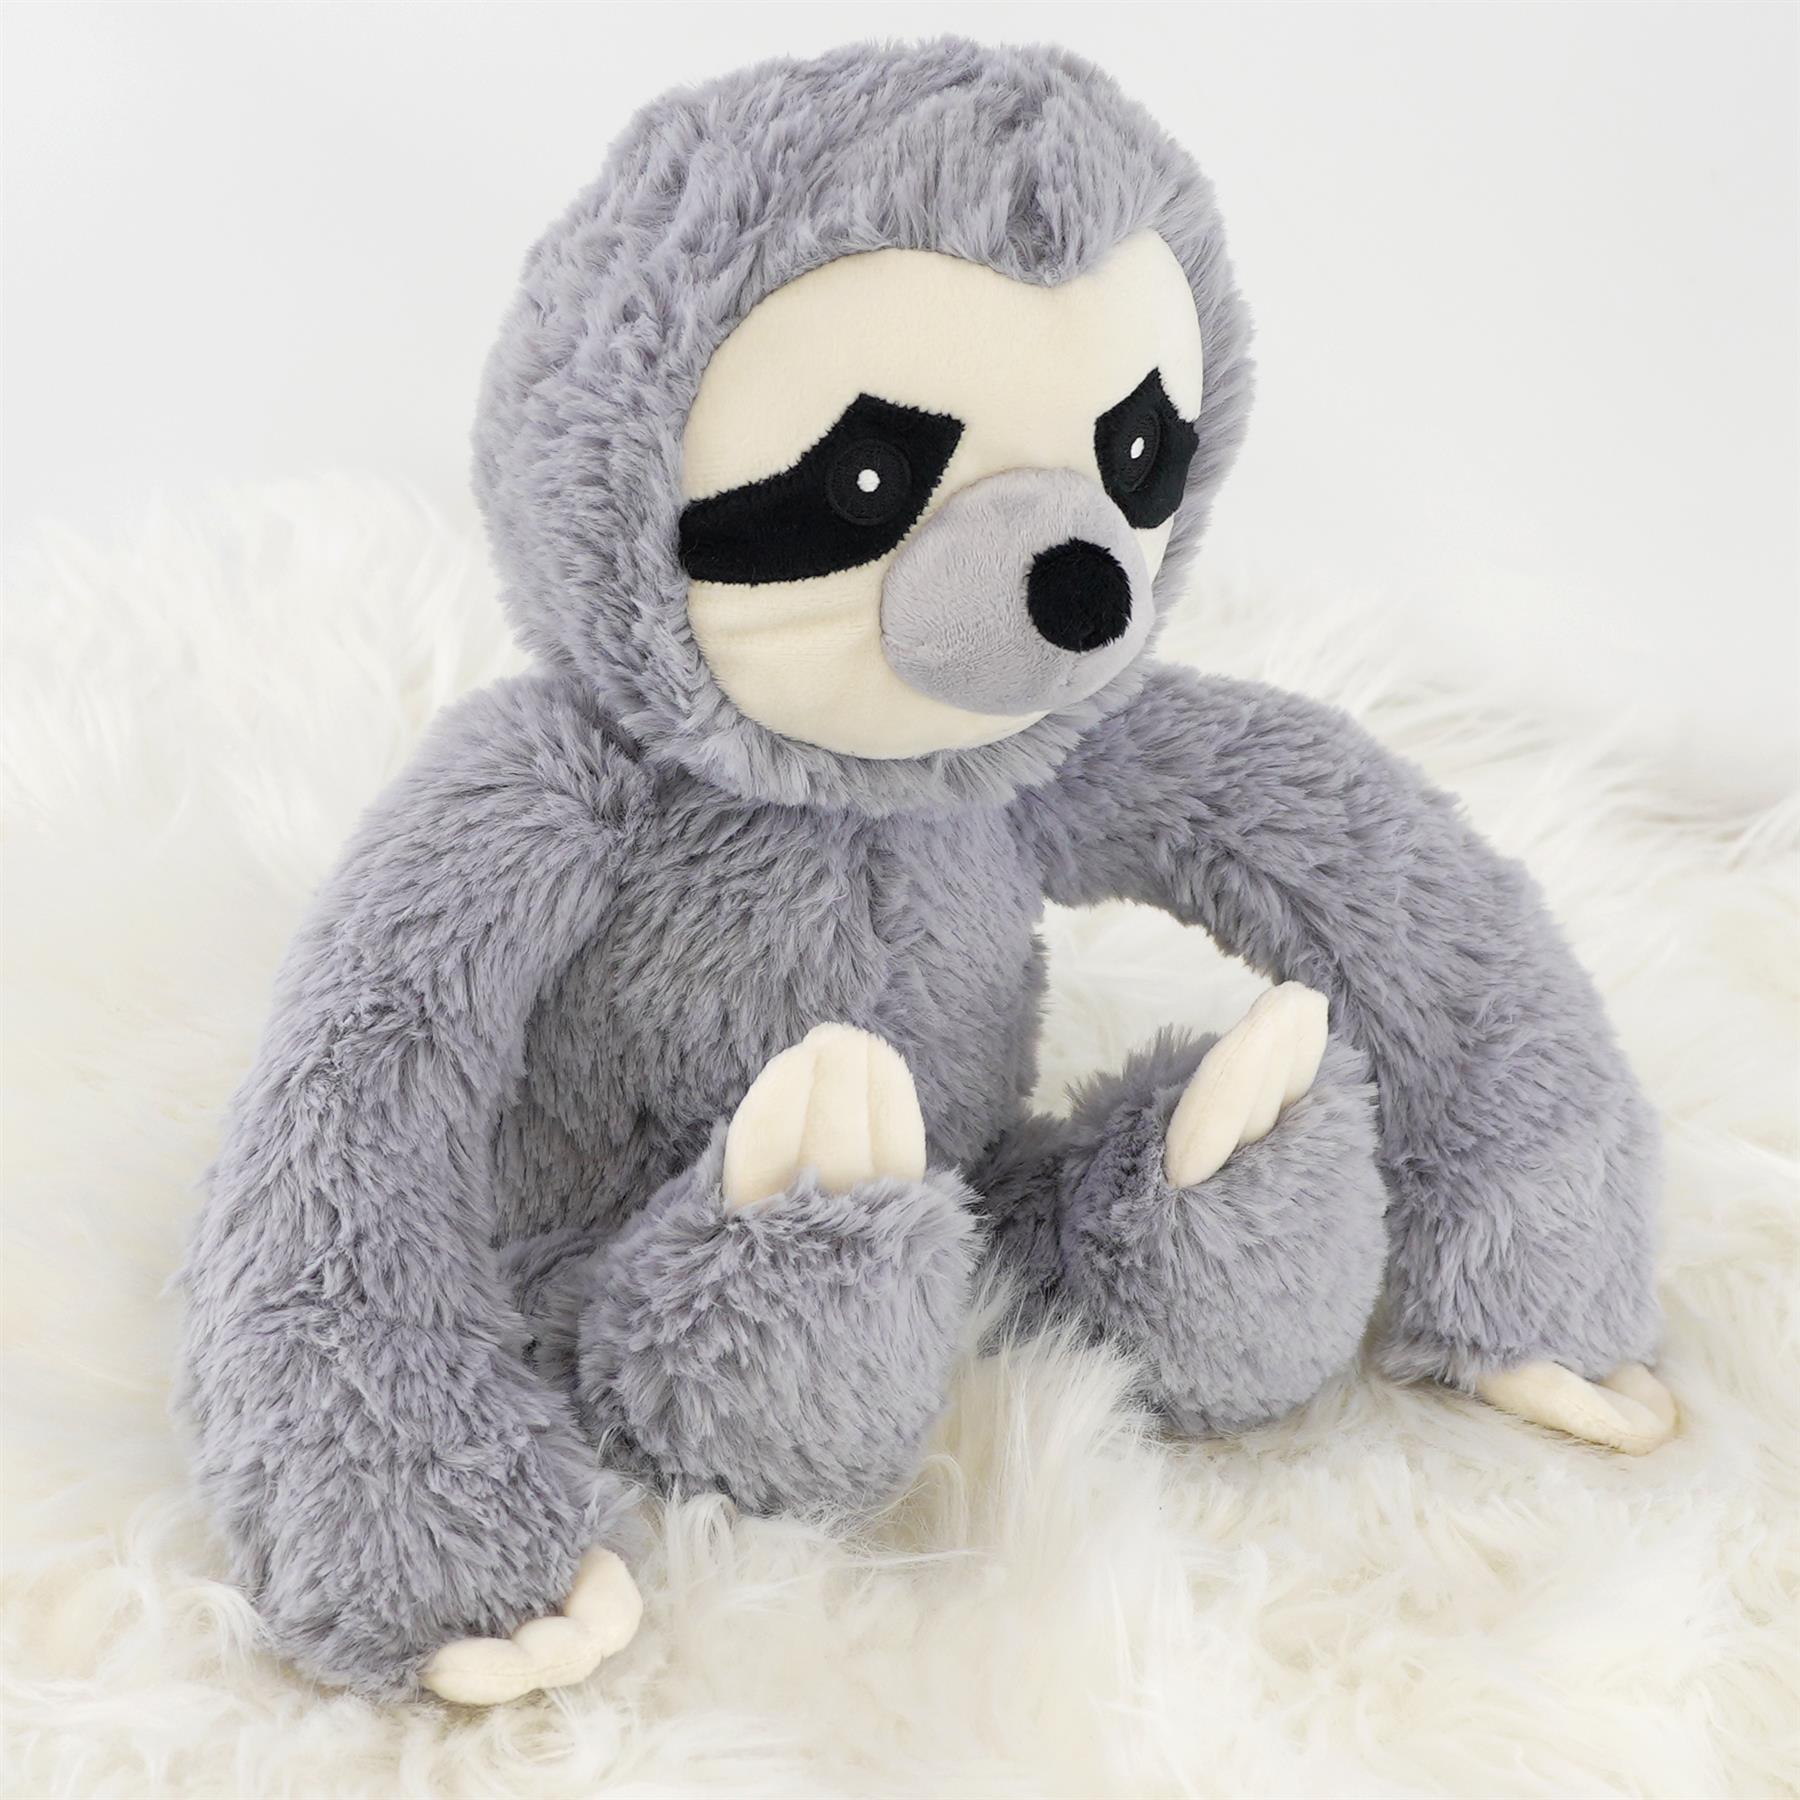 Plush Super Soft Hanging Sloth Cuddly Toy by The Magic Toy Shop - The Magic Toy Shop